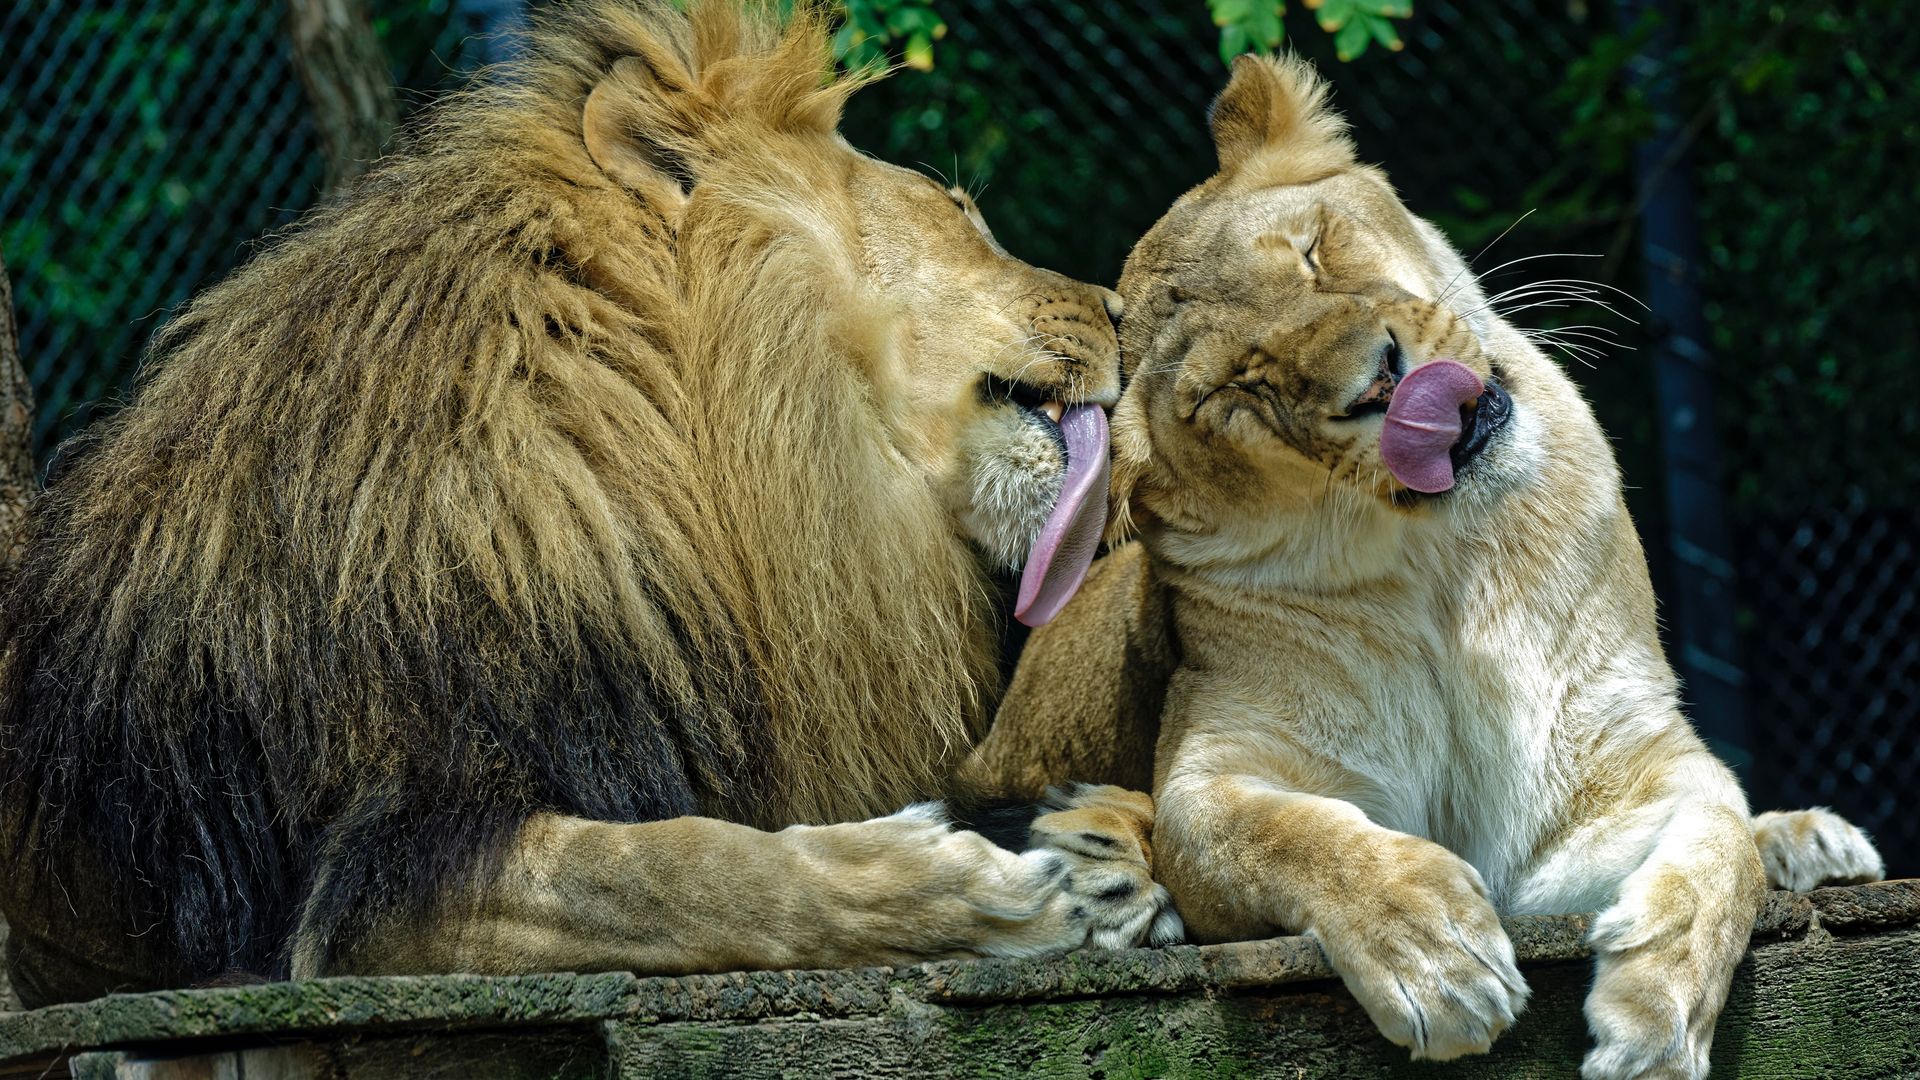 Lions Love - Lions Grooming Each Other - 1920x1080 Wallpaper 